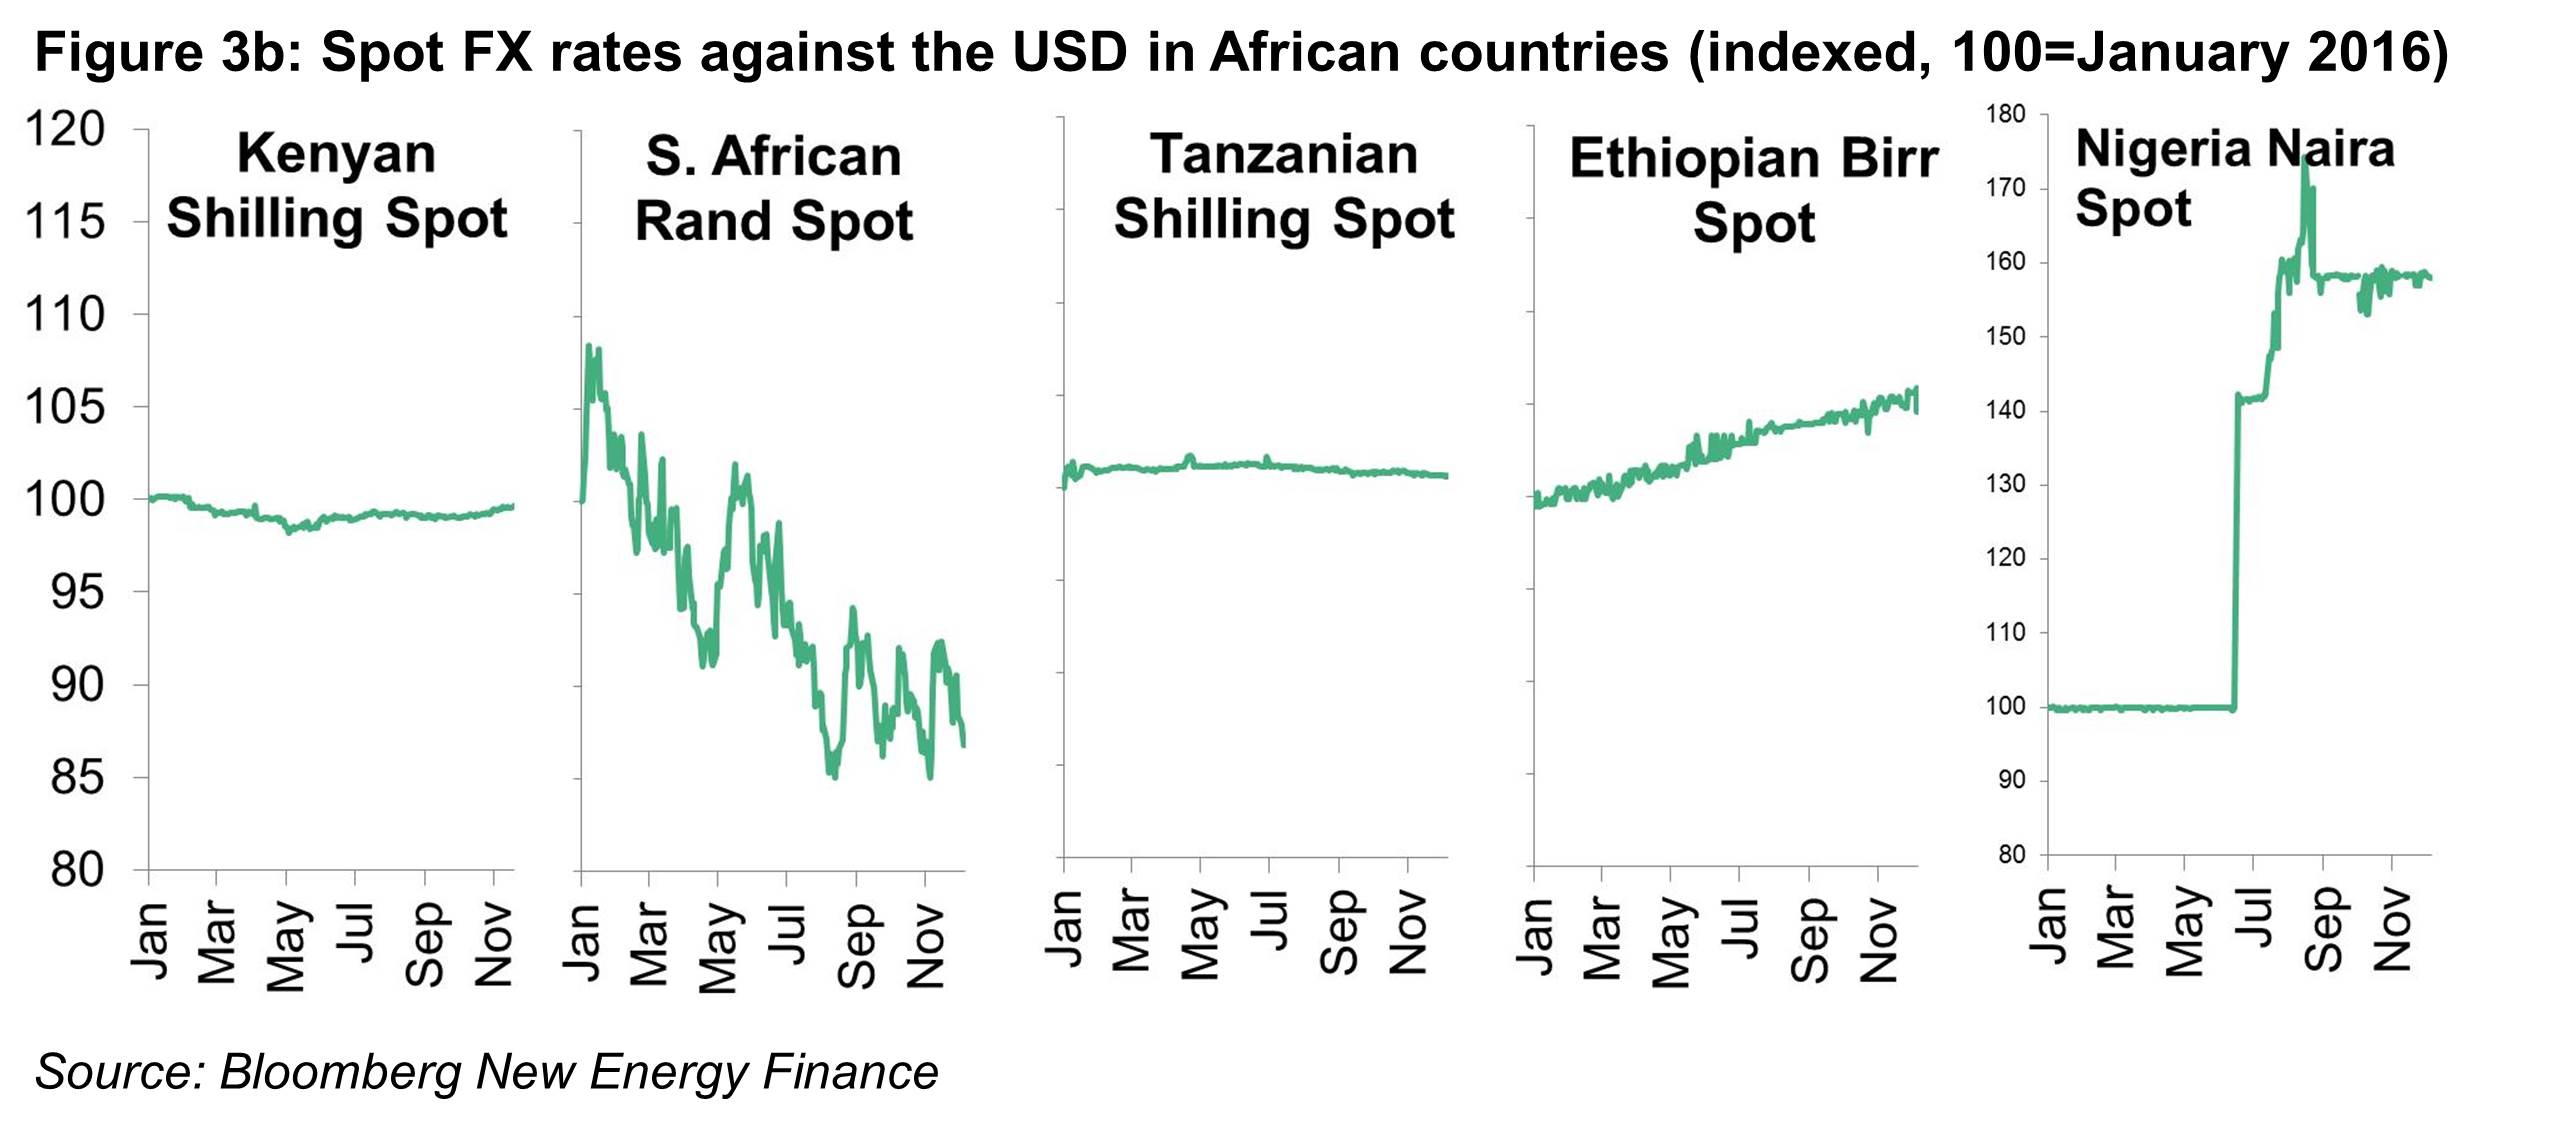 OG - Fig3 - Spot FX rates against the USD in African countries